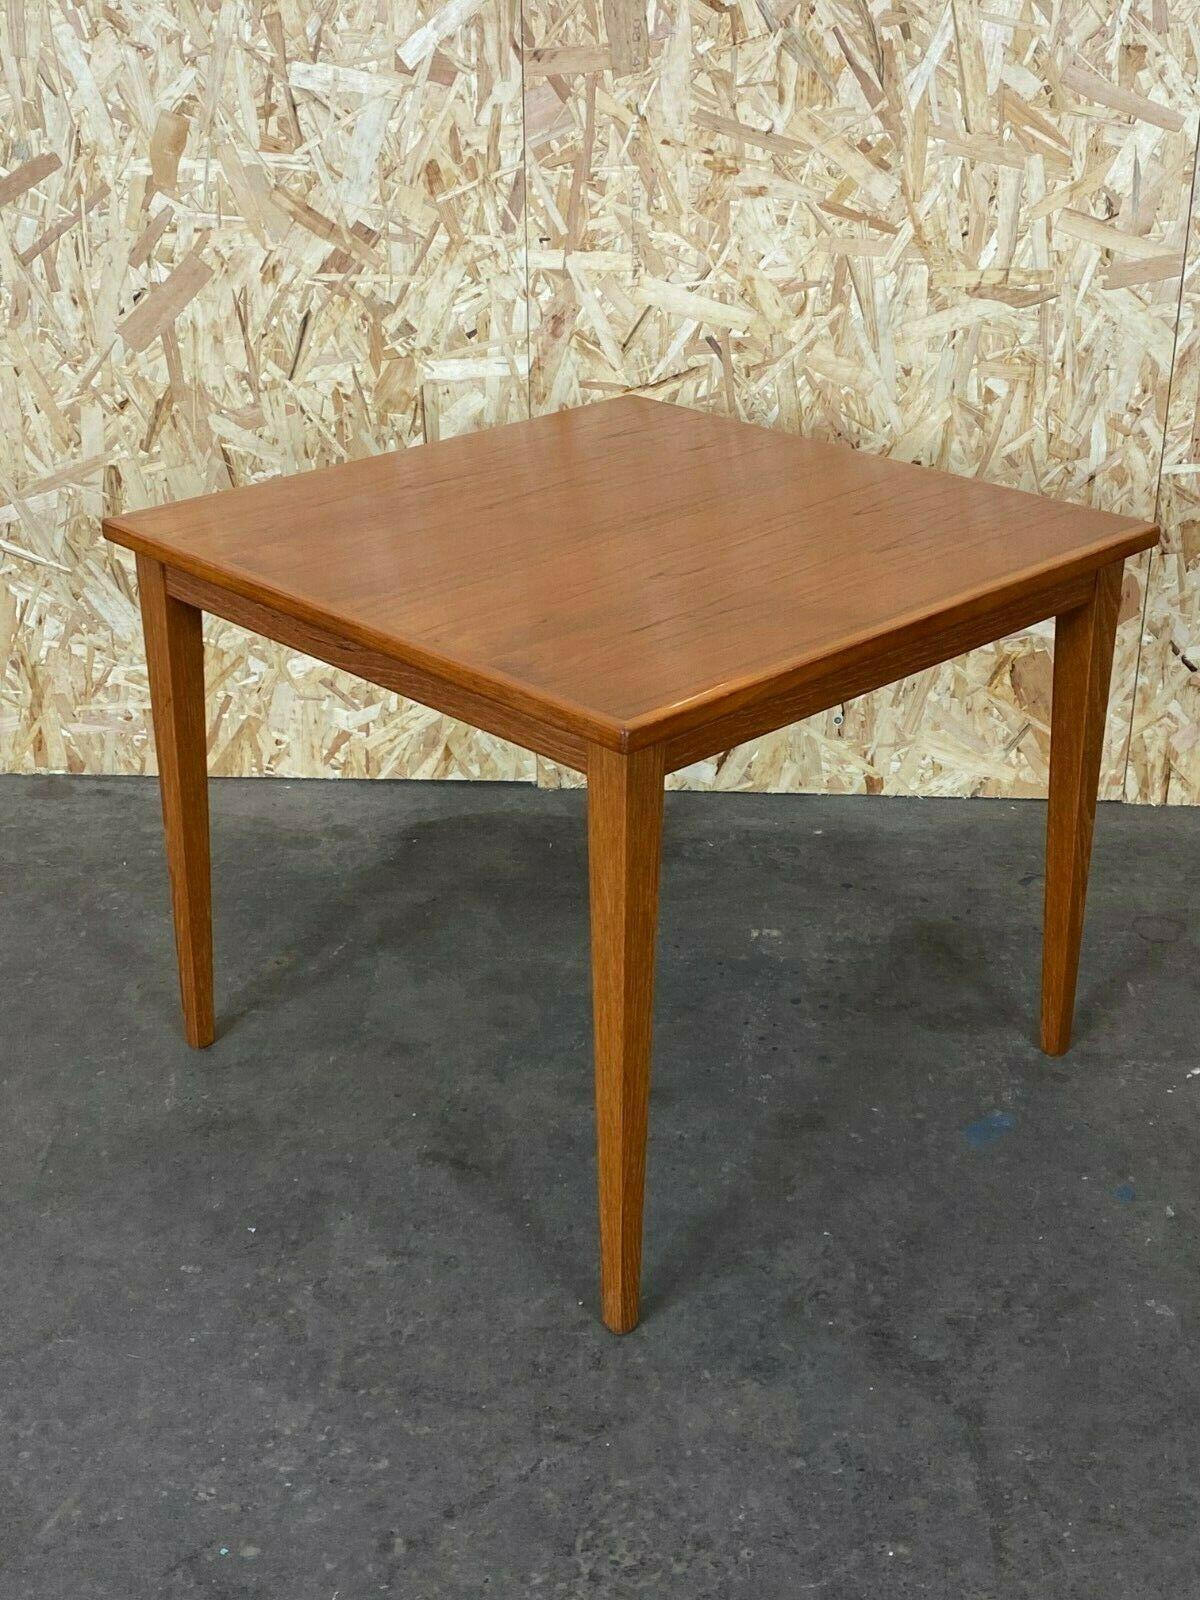 60s 70s Teak table coffee table coffee table Kvaletit Danish Modern Design

Object: coffee table / side table

Manufacturer:

Condition: good

Age: around 1960-1970

Dimensions:

57.5cm x 57.5cm x 47cm

Other notes:

The pictures